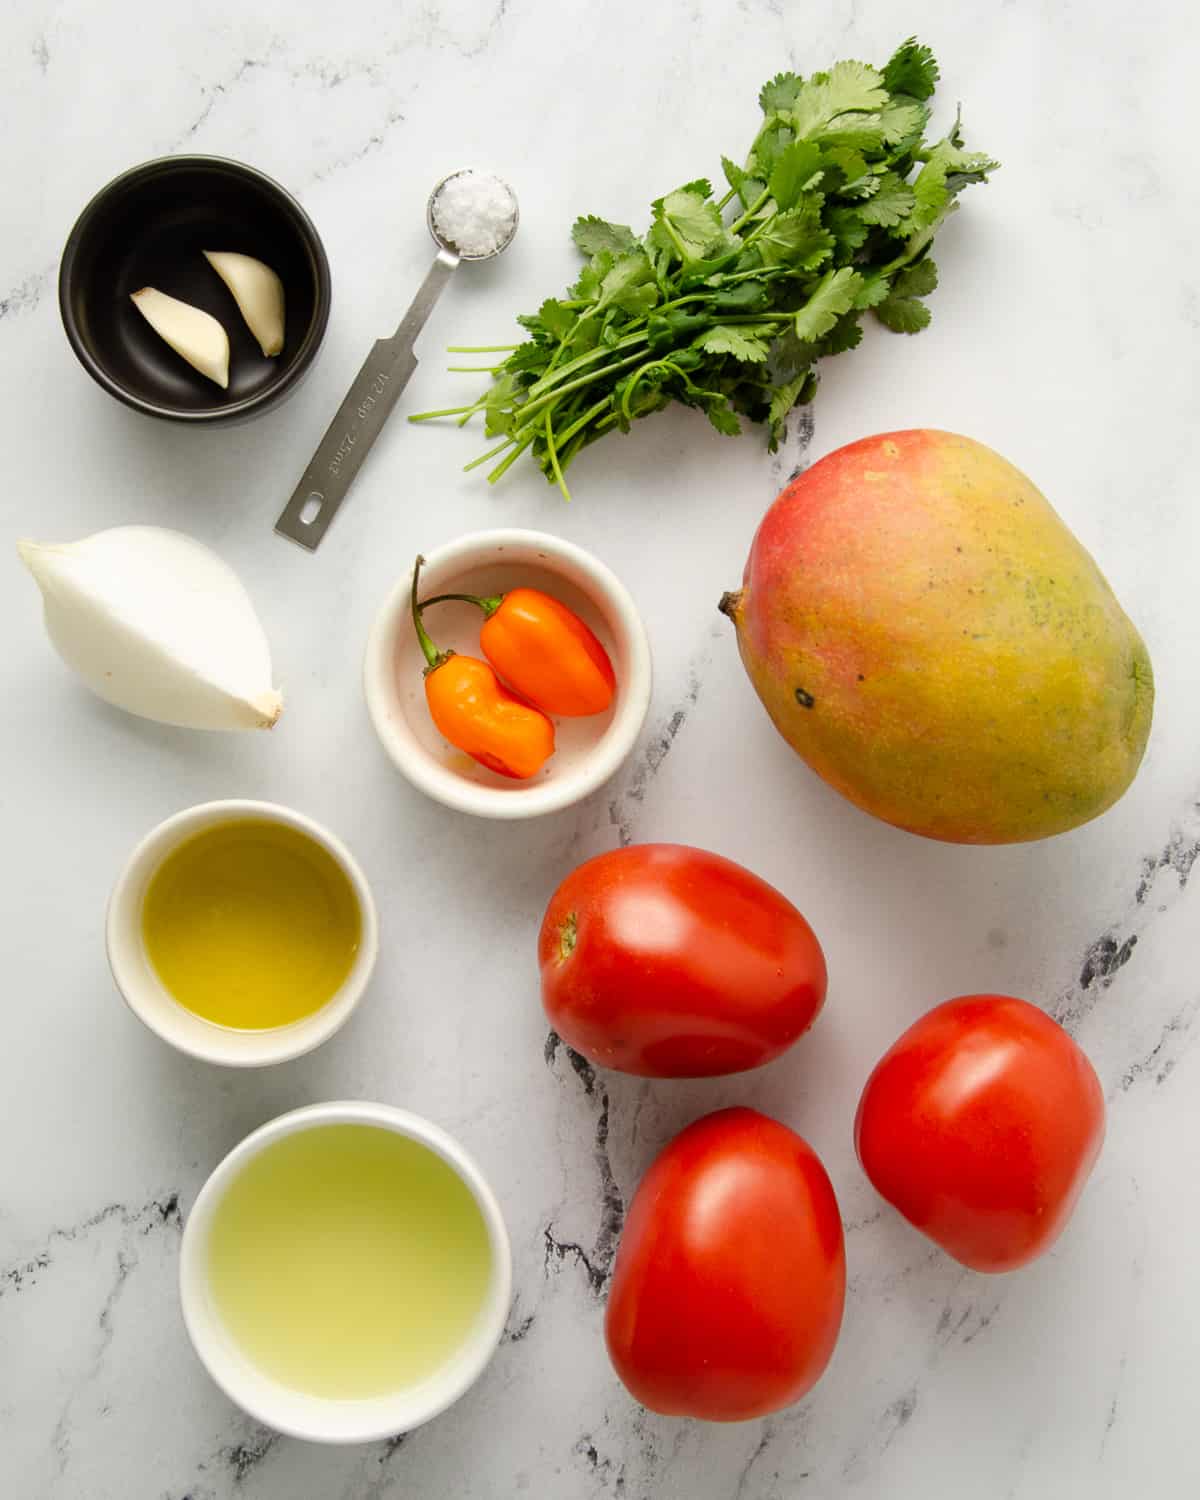 Ingredients for making an authentic mango habanero salsa.